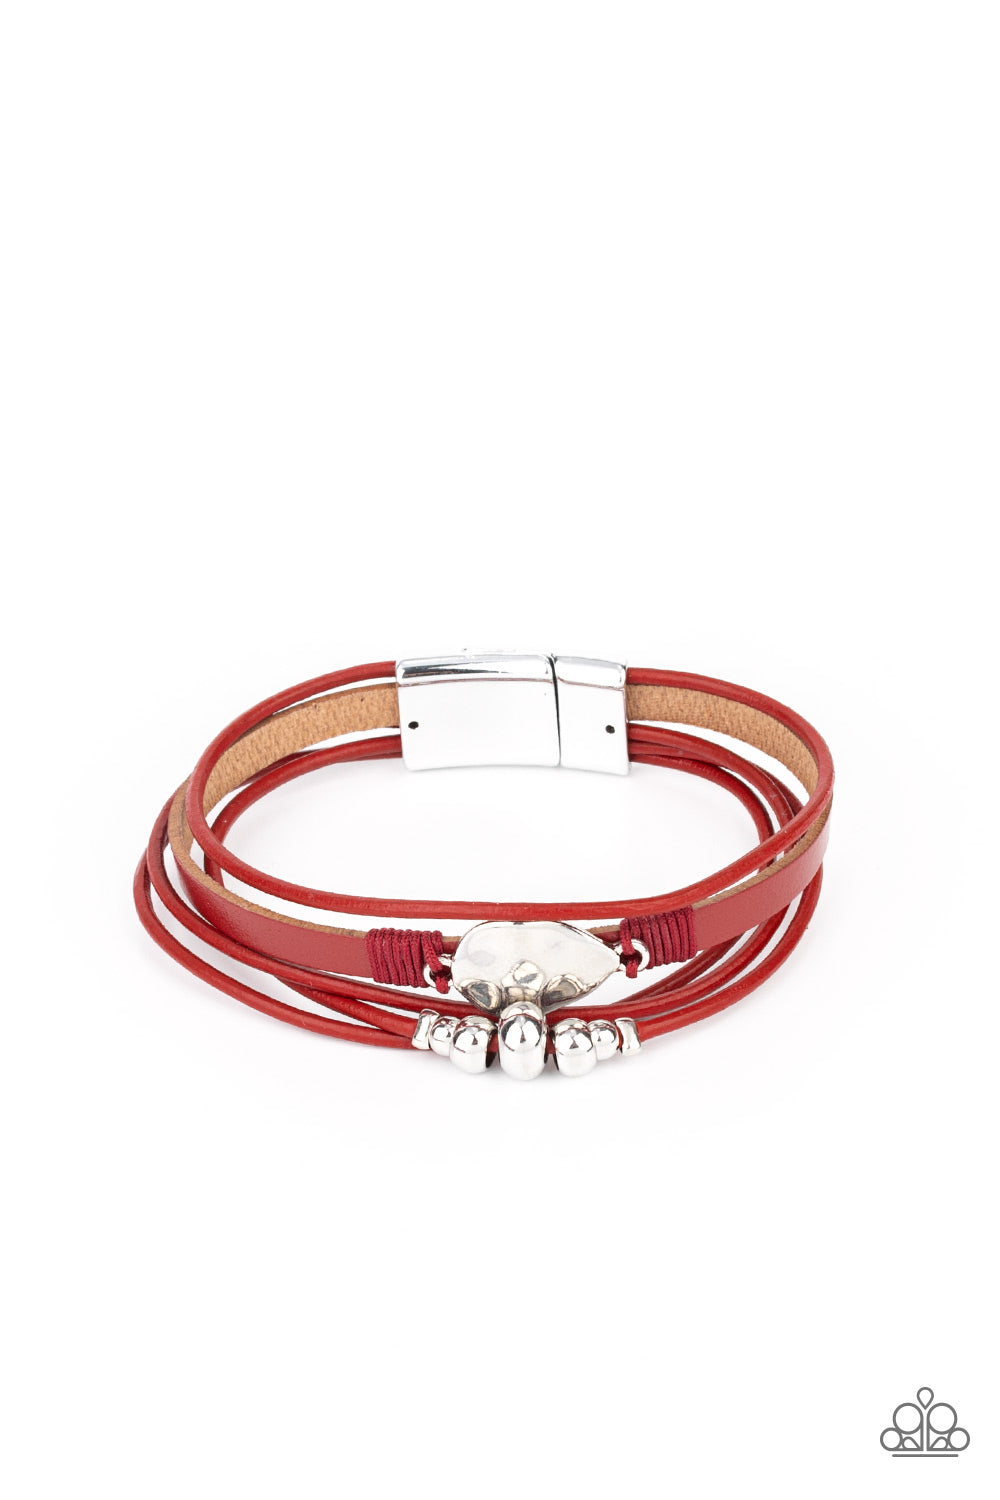 Tahoe Tourist - Red bracelet (2021 FALL "PREVIEW") Success